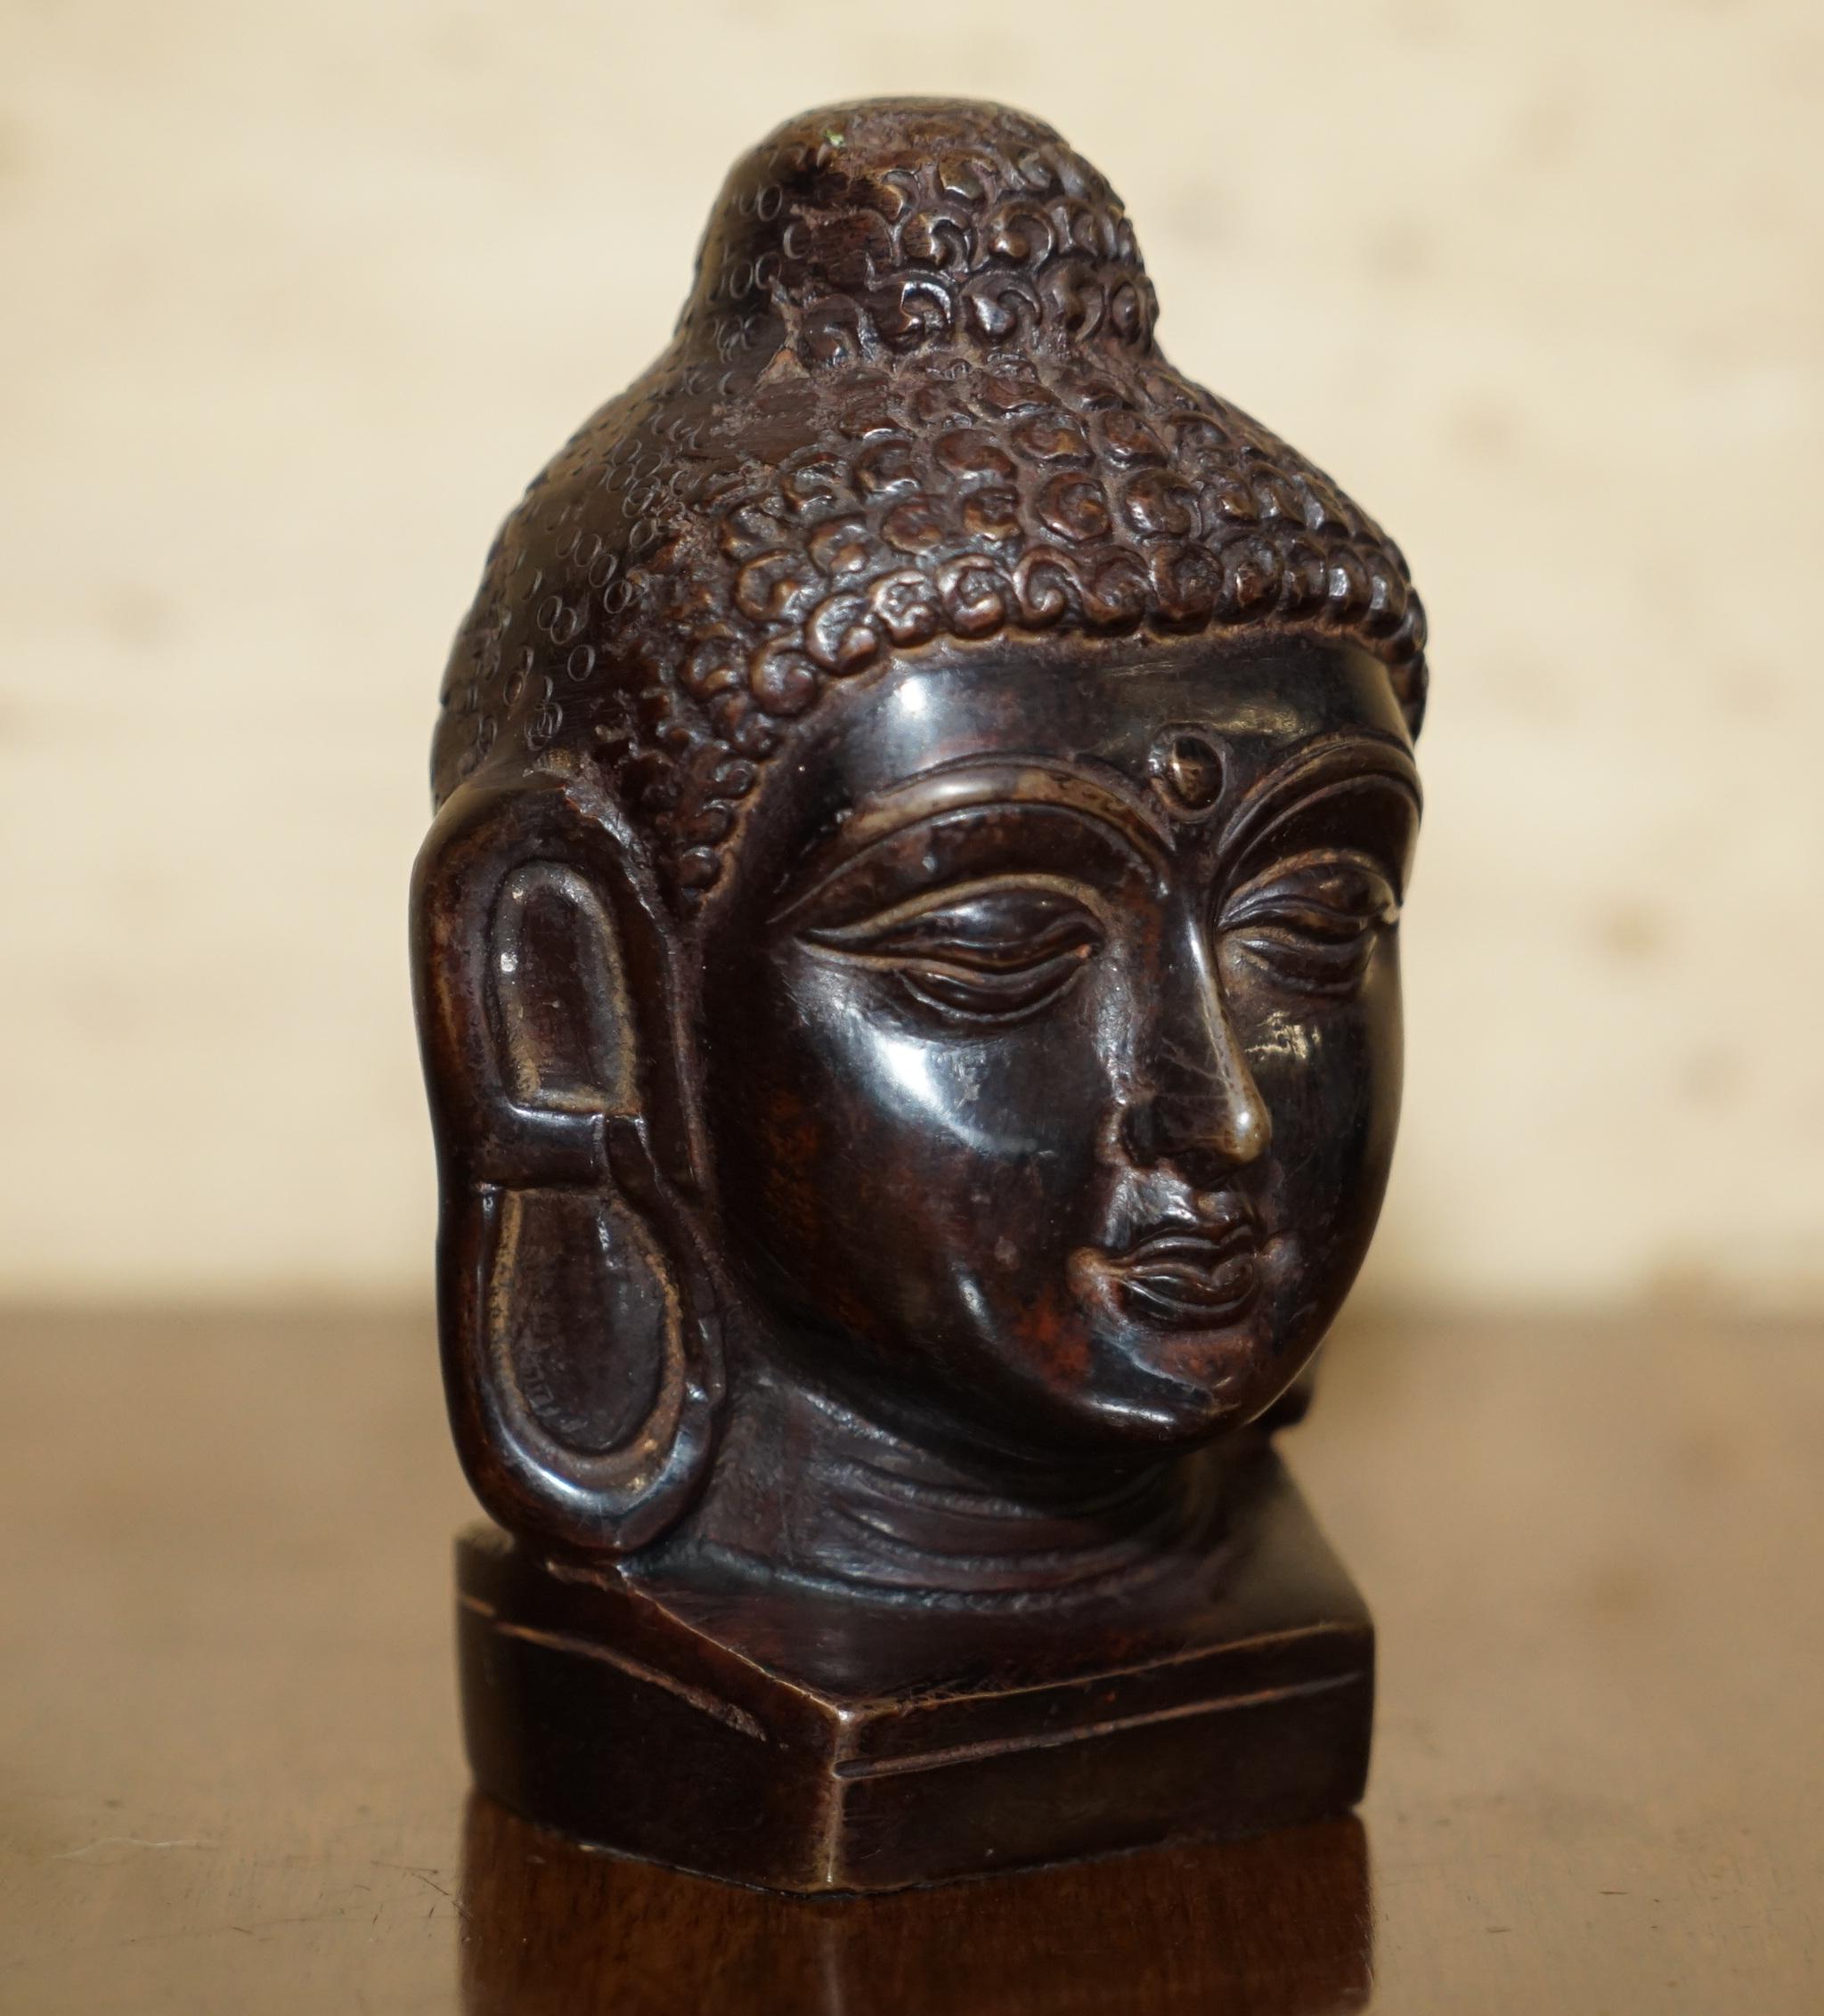 We are delighted to offer for sale this lovely pair of bronzed Indonesian Buddha head statues

A very nicely cast pair, we have owned them for around 20 years and they weren’t new when we bought them, I’m not sure of the exact age but they have a